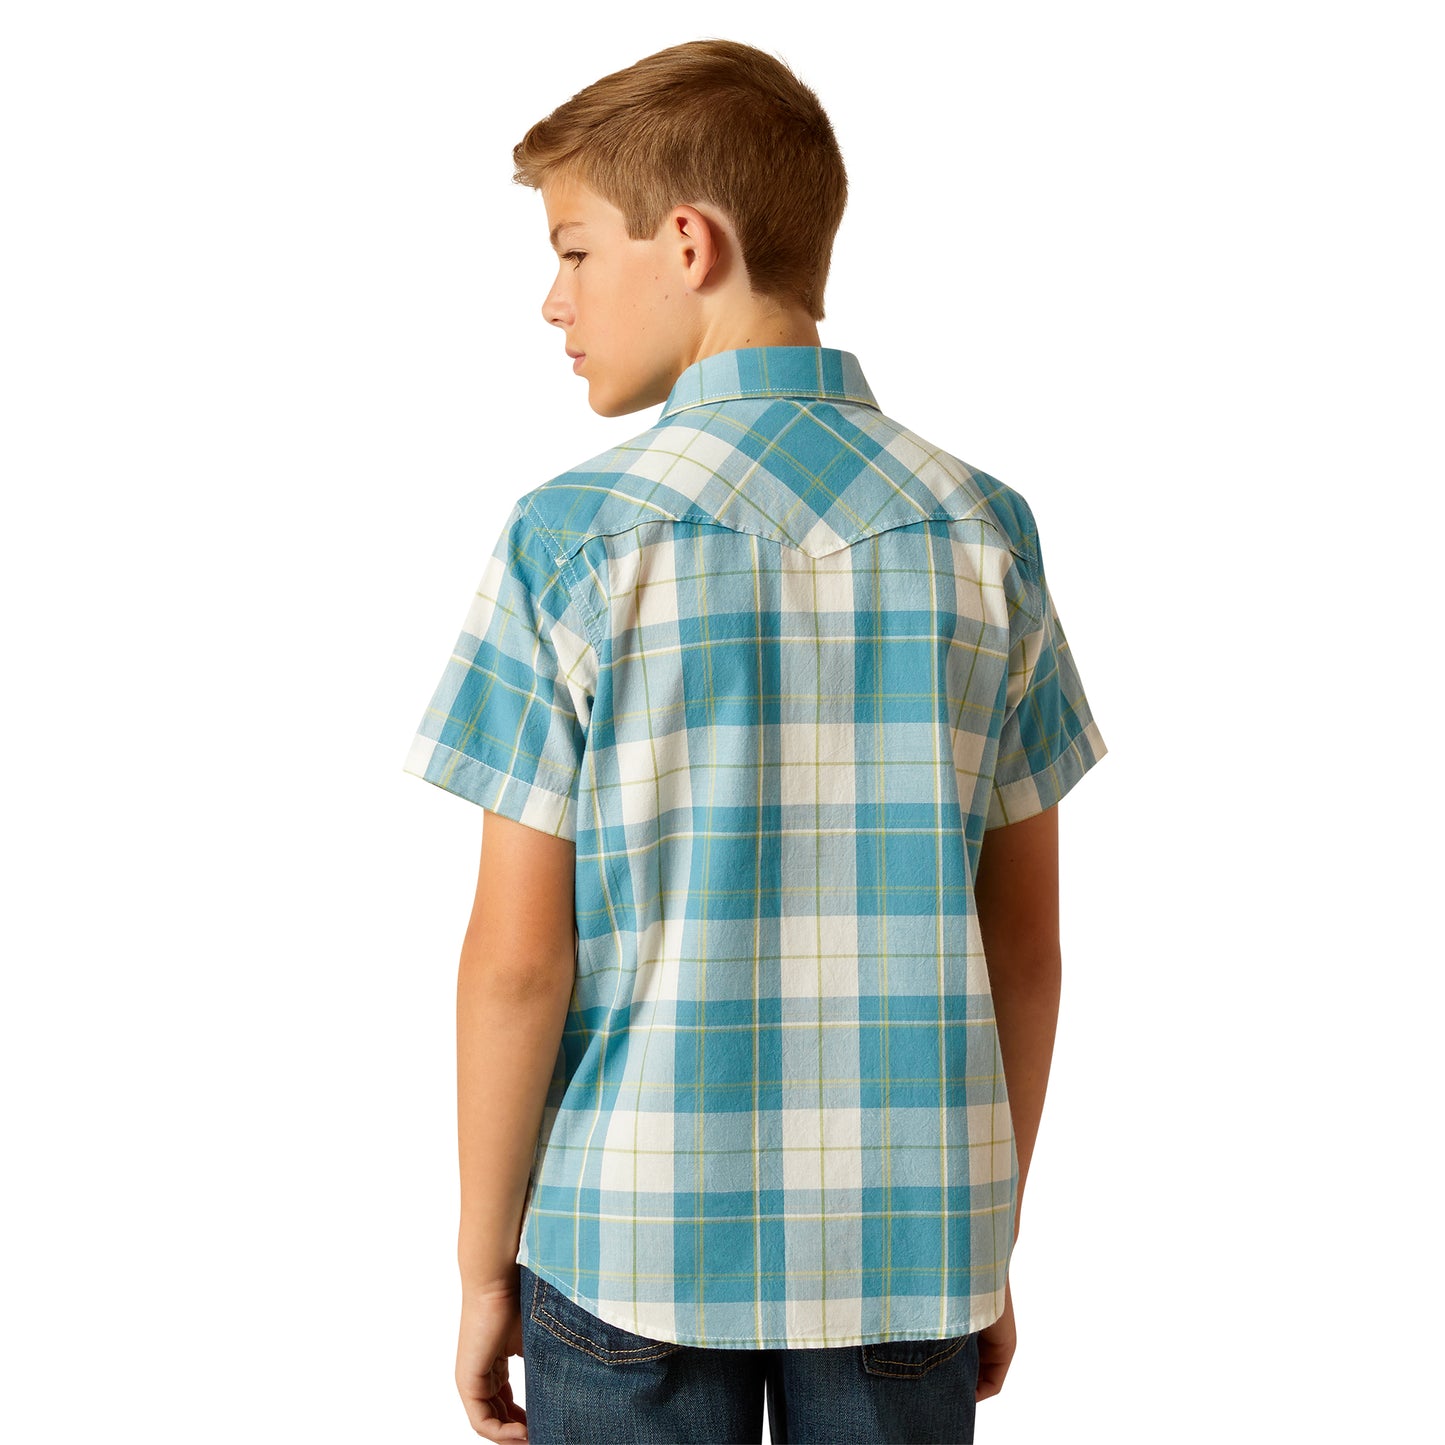 Ariat Youth Boy's Harry Retro Fit Gasoline Blue Snap Down Shirt 10051405